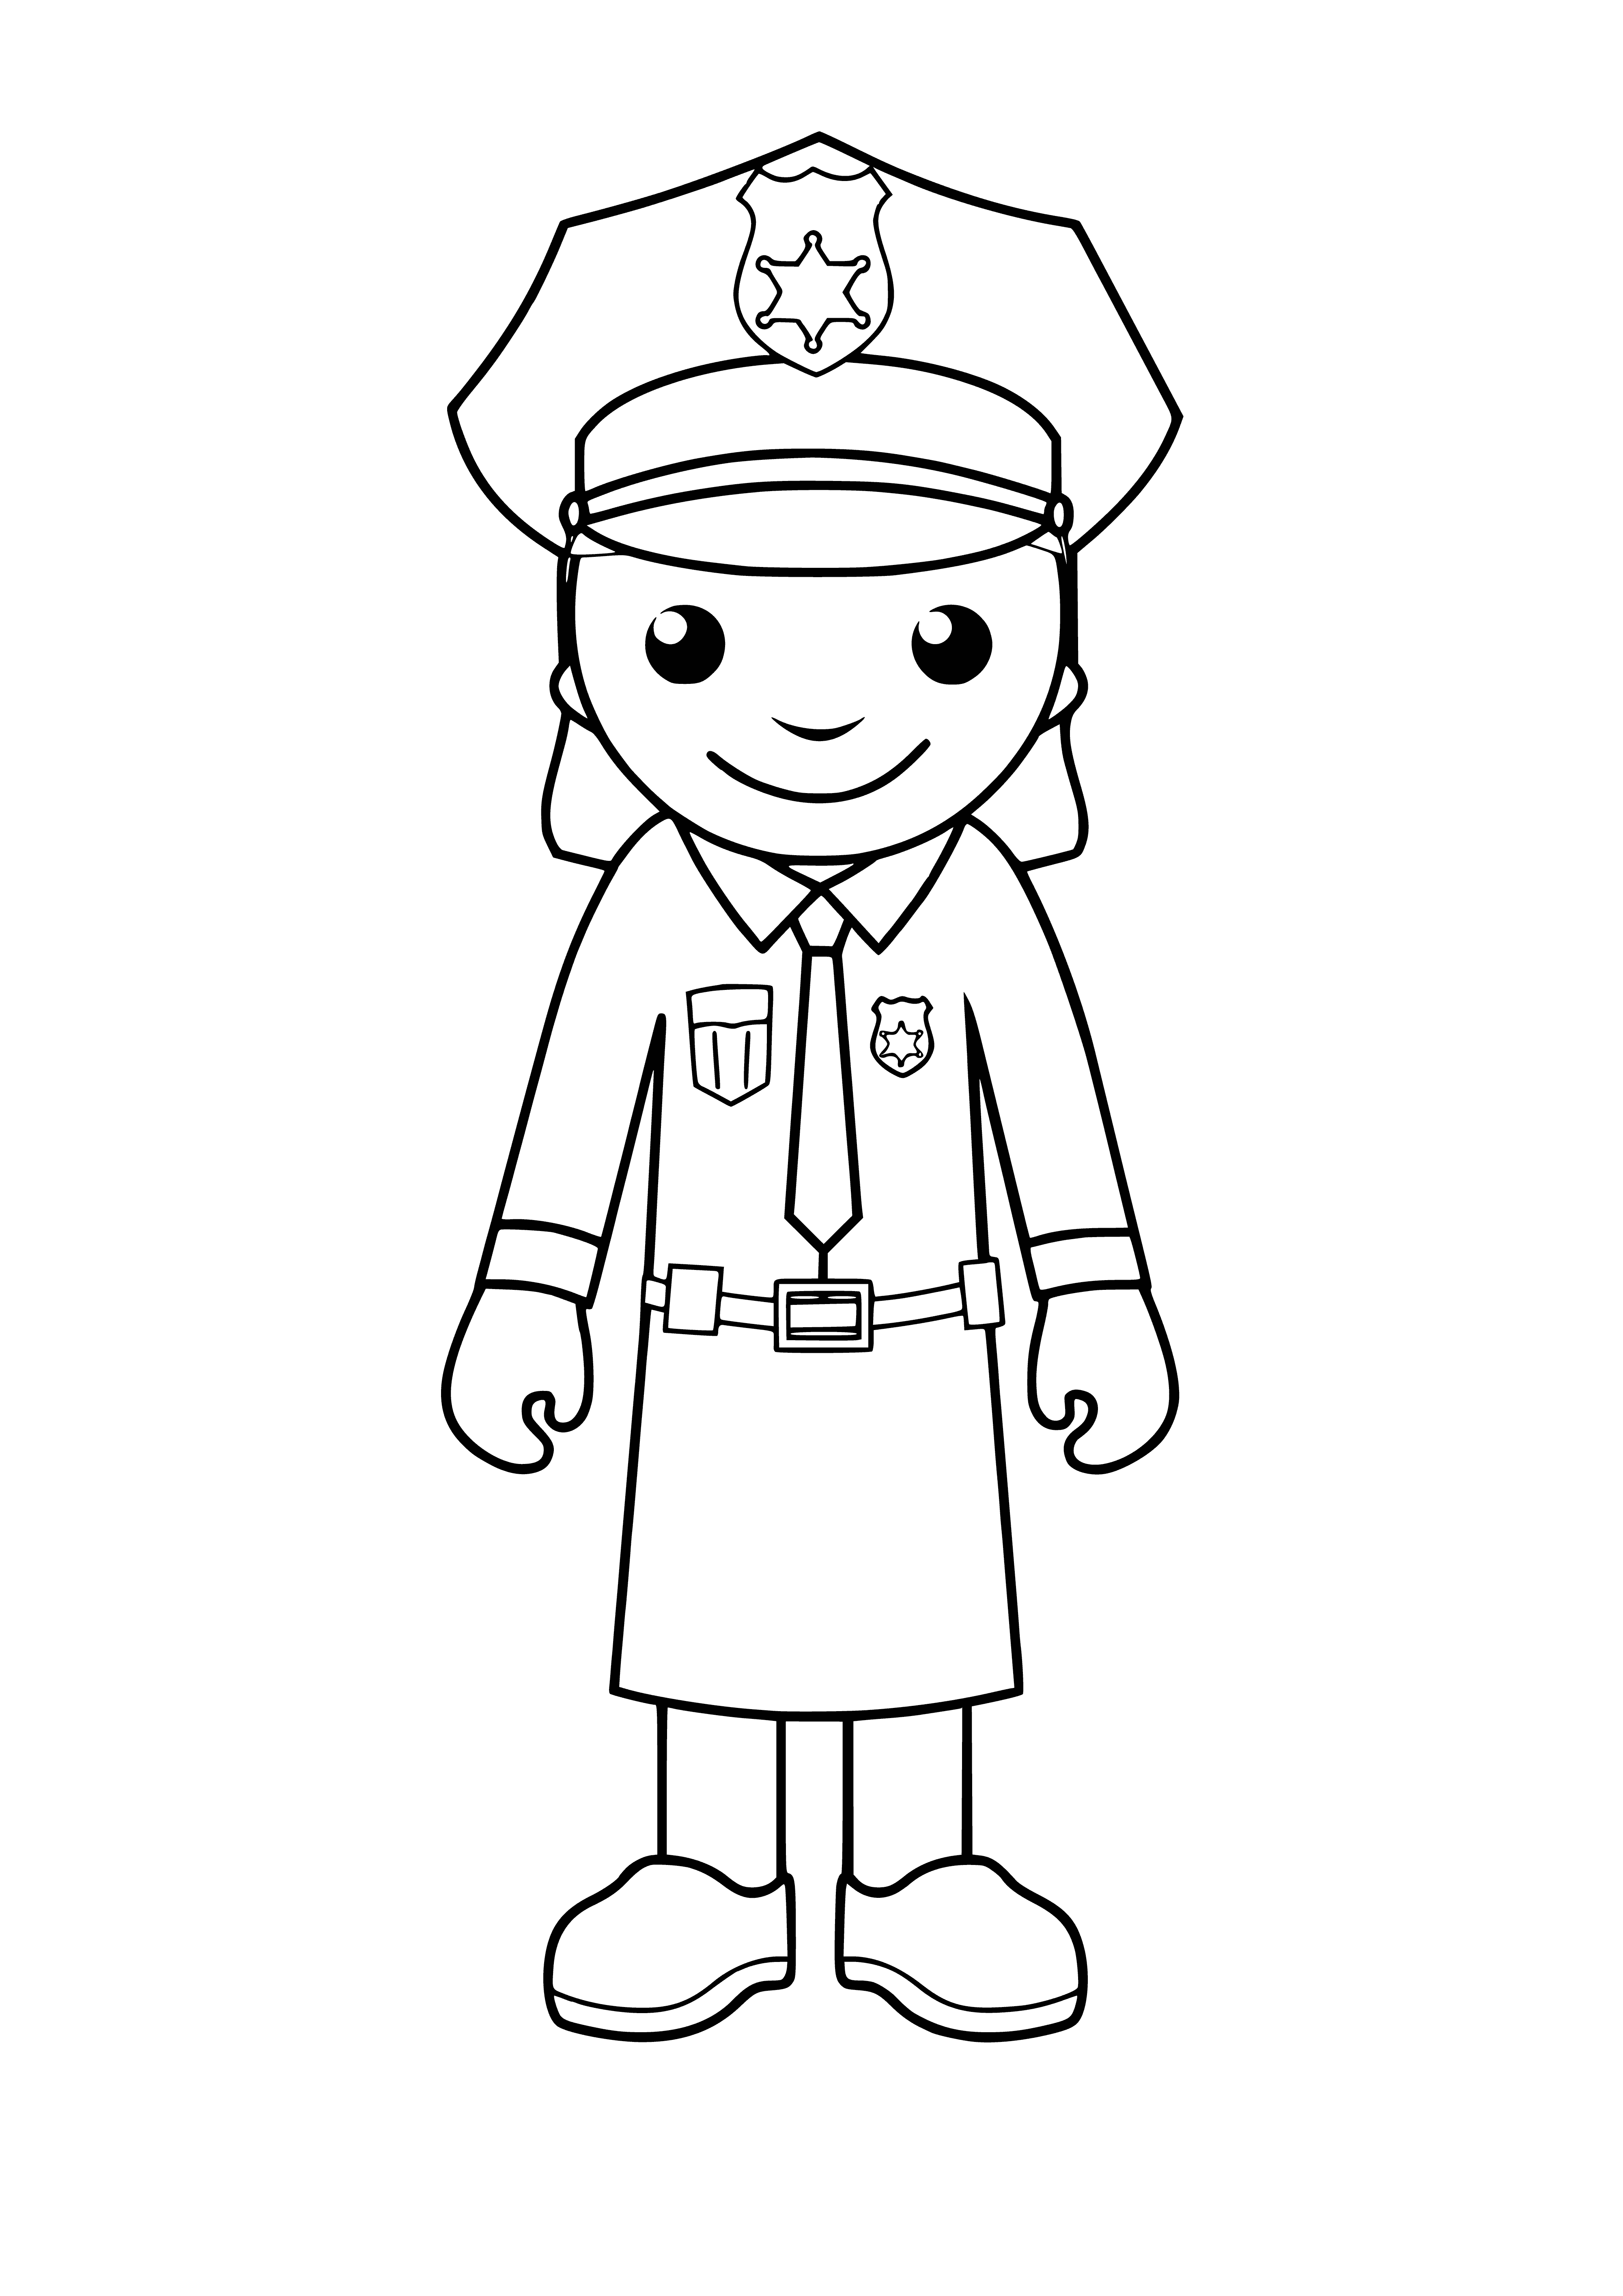 coloring page: Cop writing on clipboard wearing uniform & holster with serious expression--coloring page for kids.